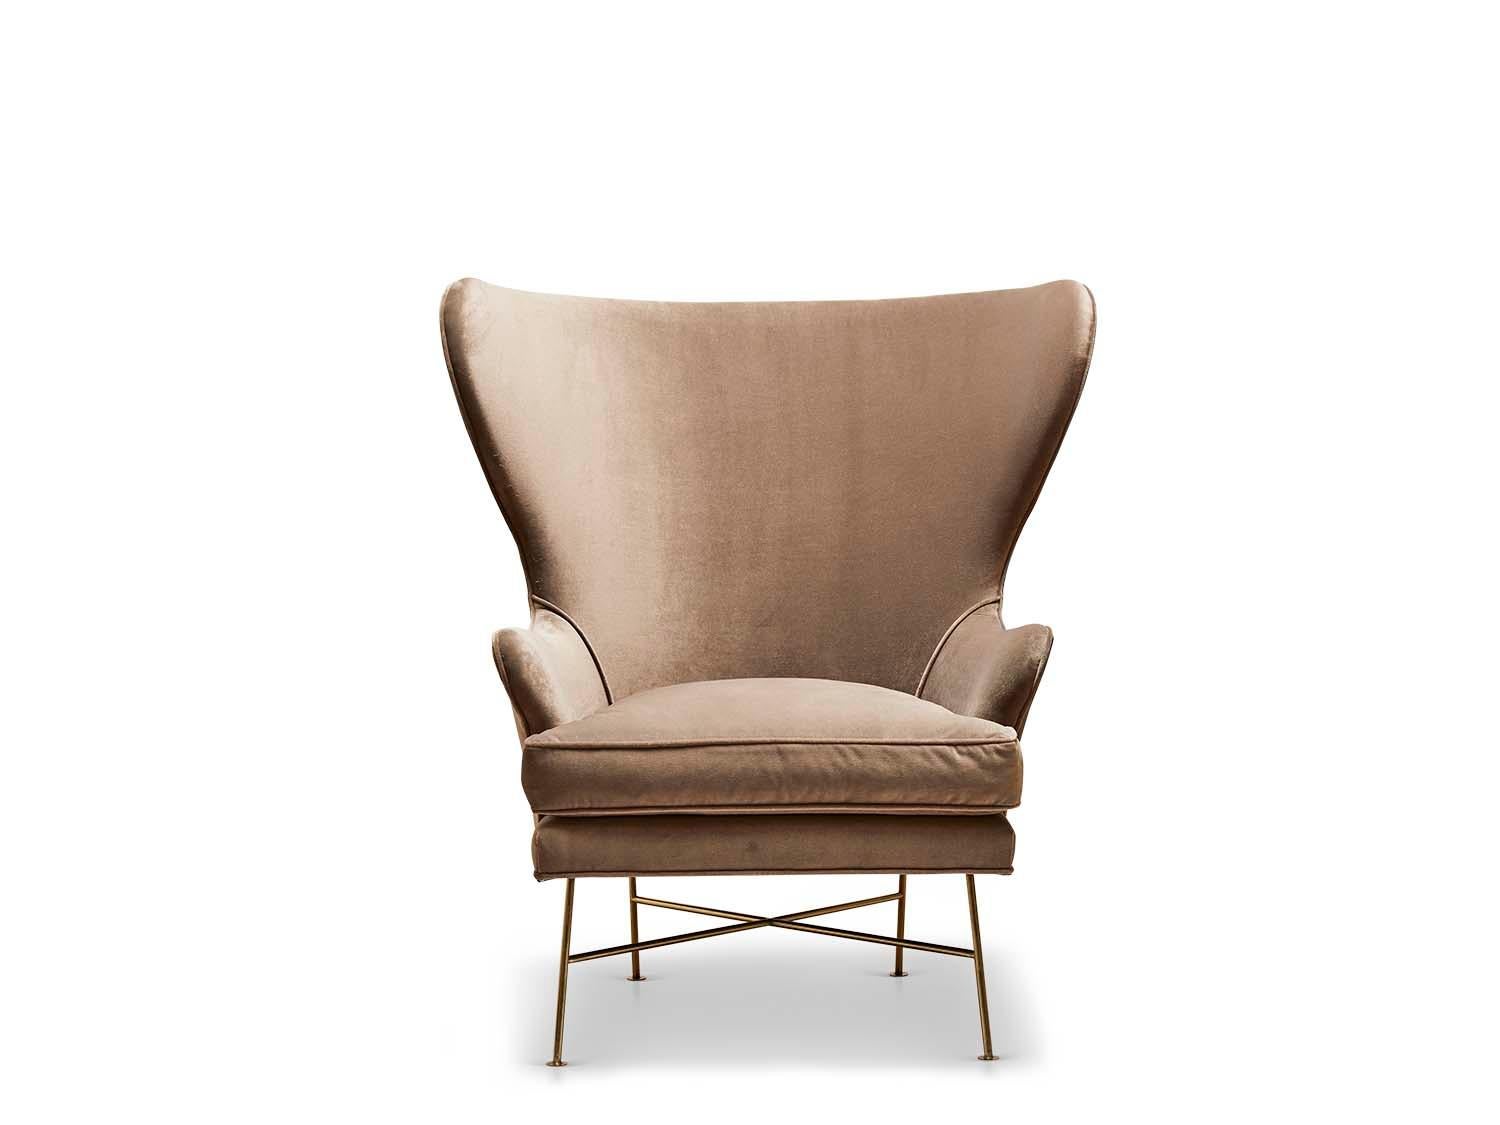 The highland wingback chair is a sculptural, wide-scale chair with a minimal metal base and down-wrapped seat cushion.

 